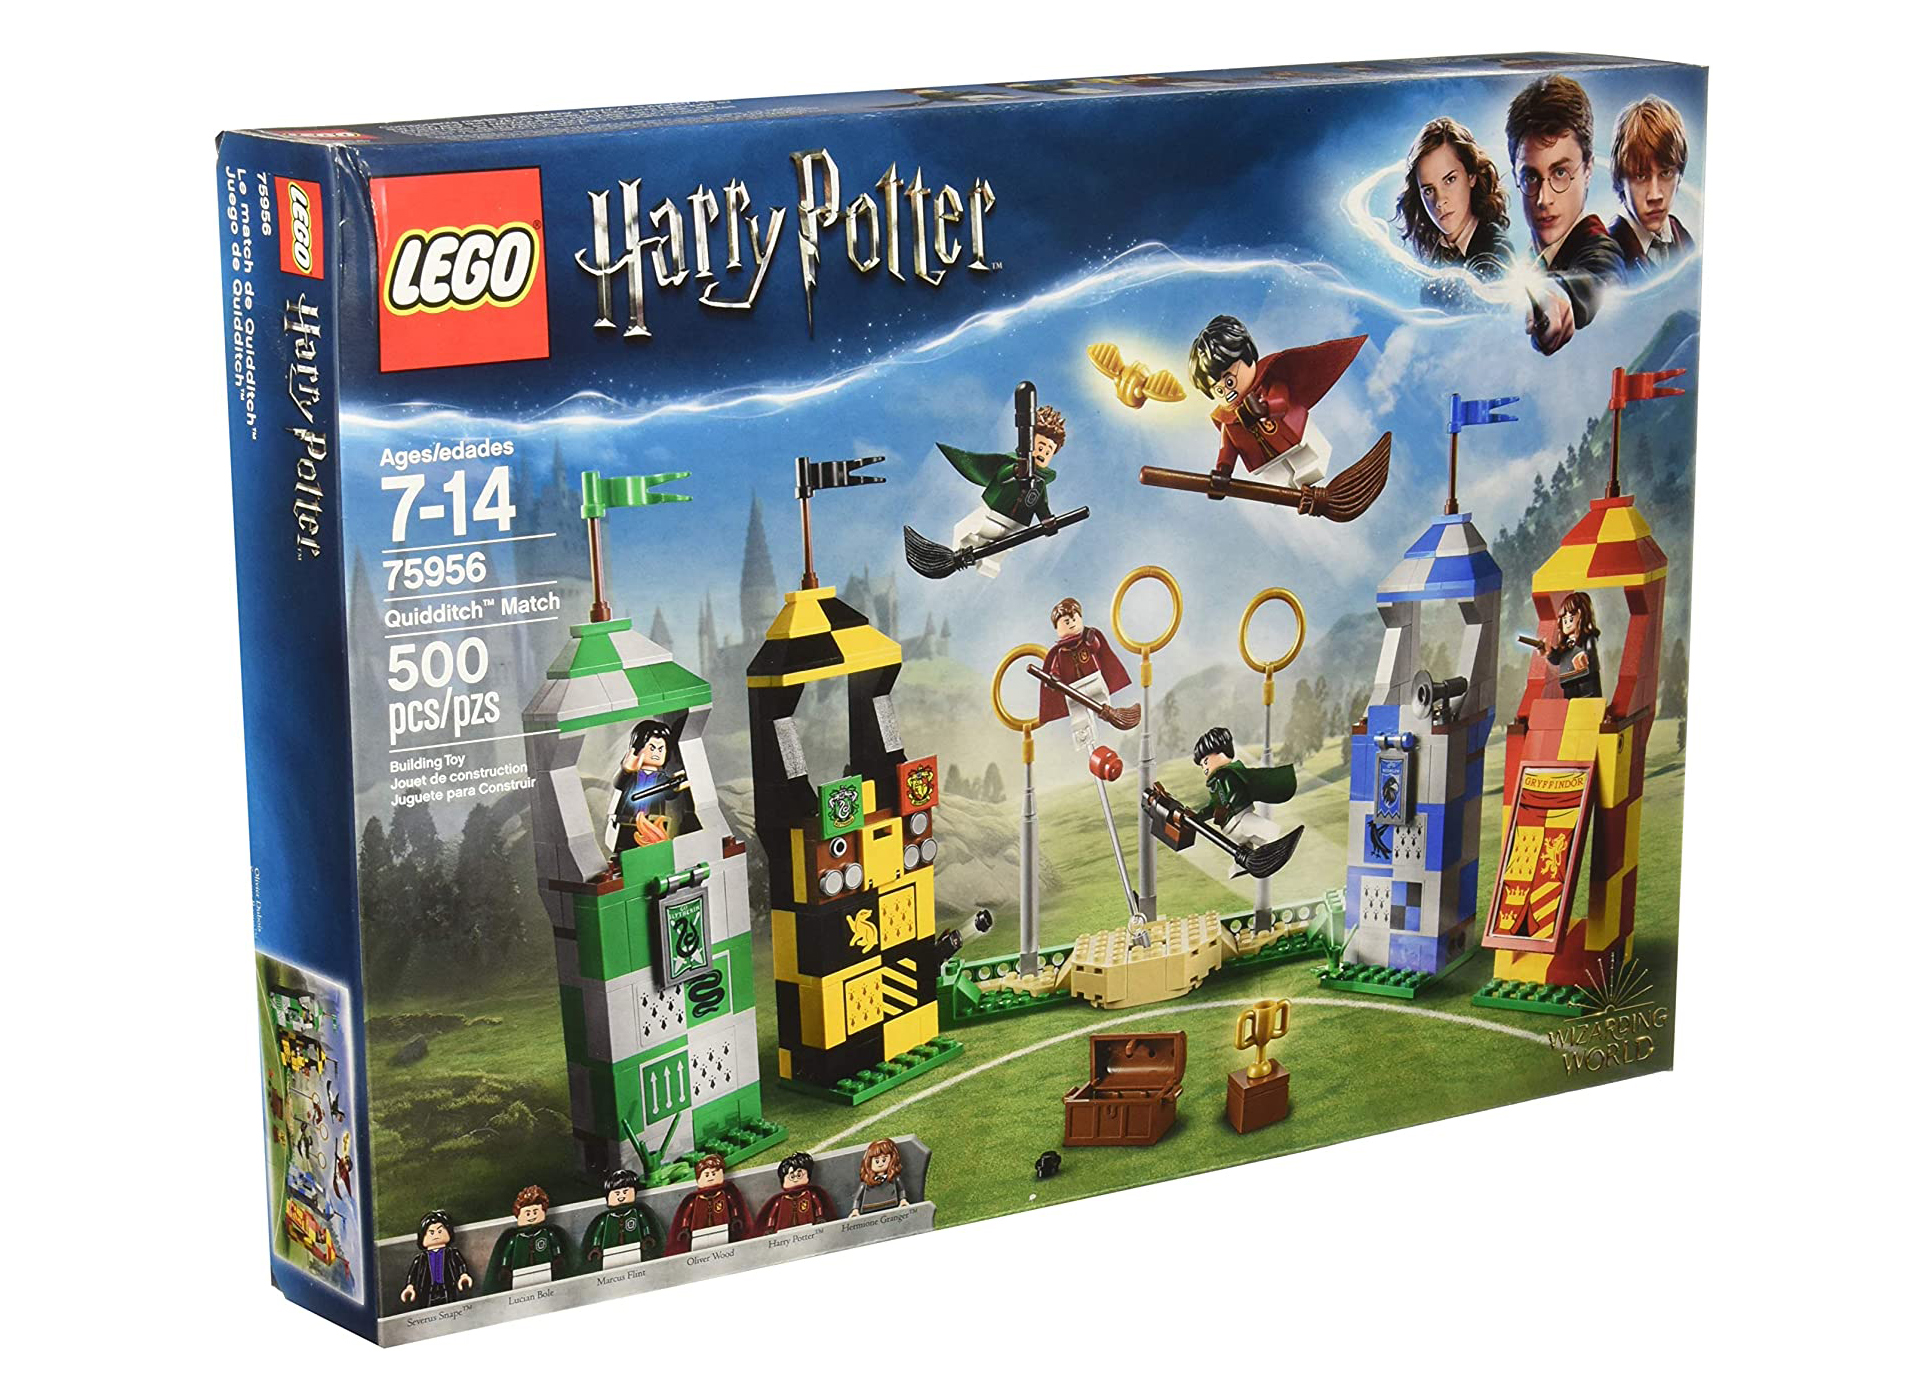 NEW LEGO 75956 Harry Potter Quidditch Match Building Set in Multi 500 Pieces 